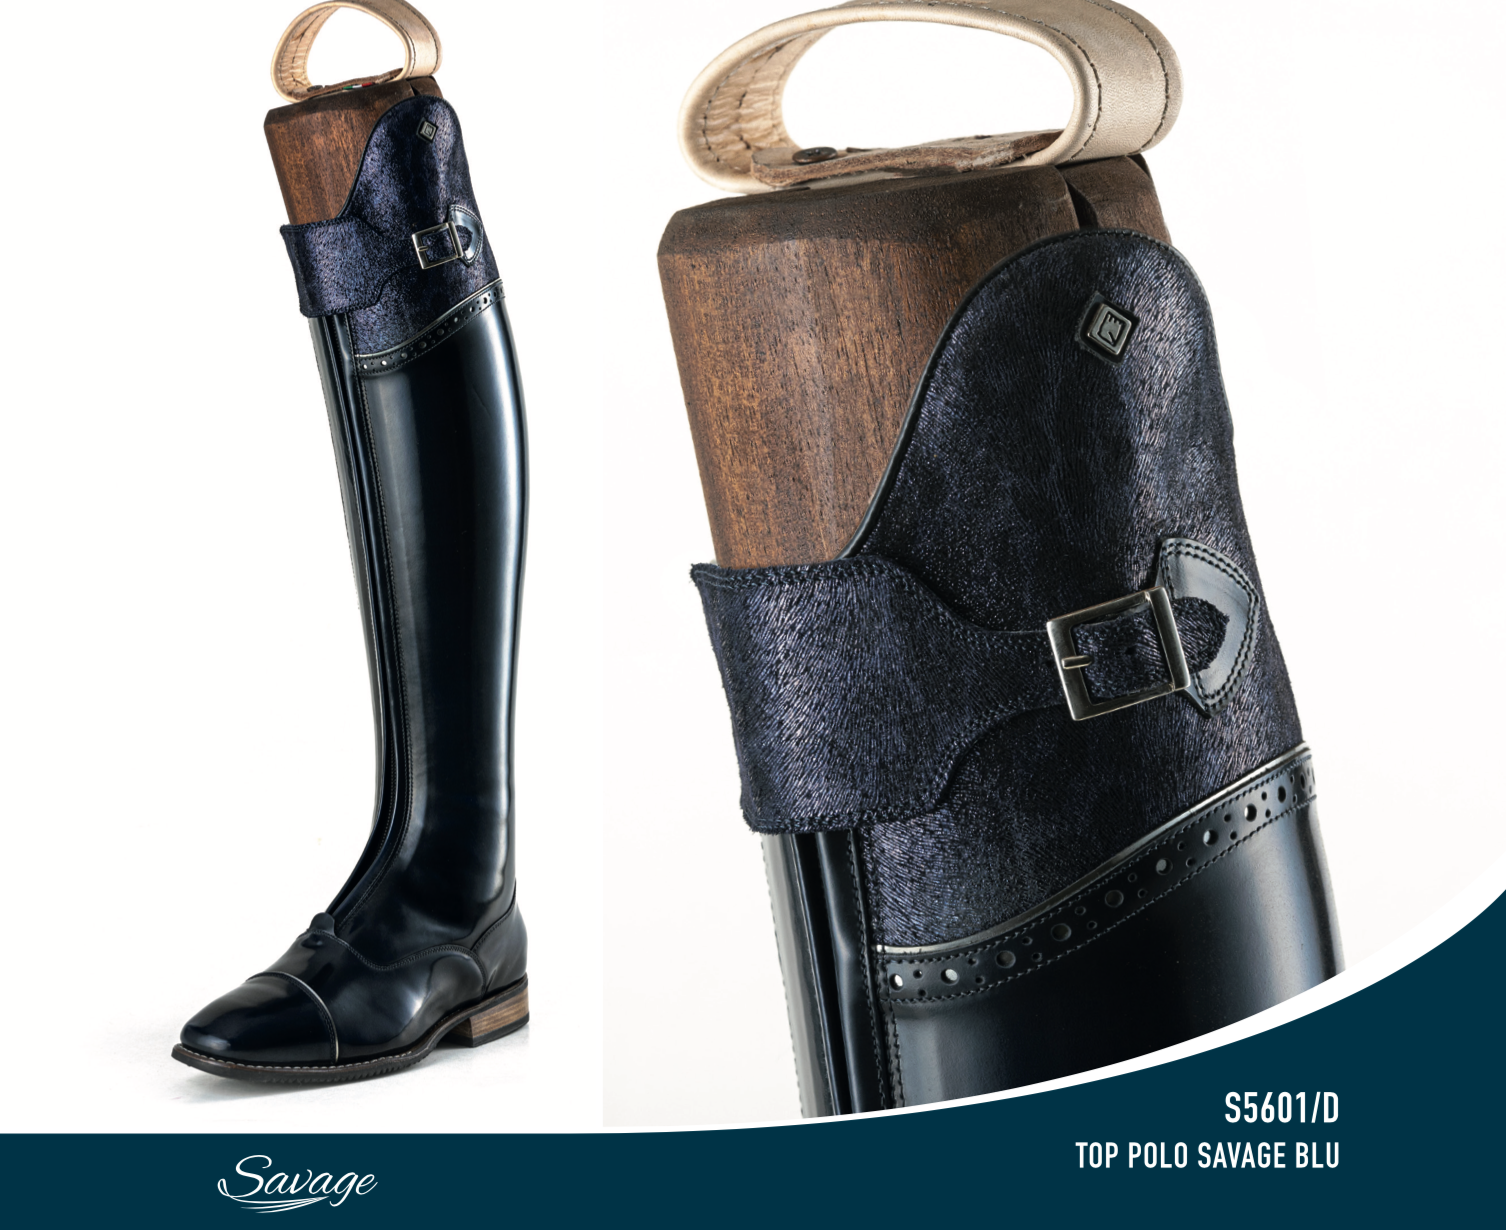 Deniro Tall boot S5601/D savage collection